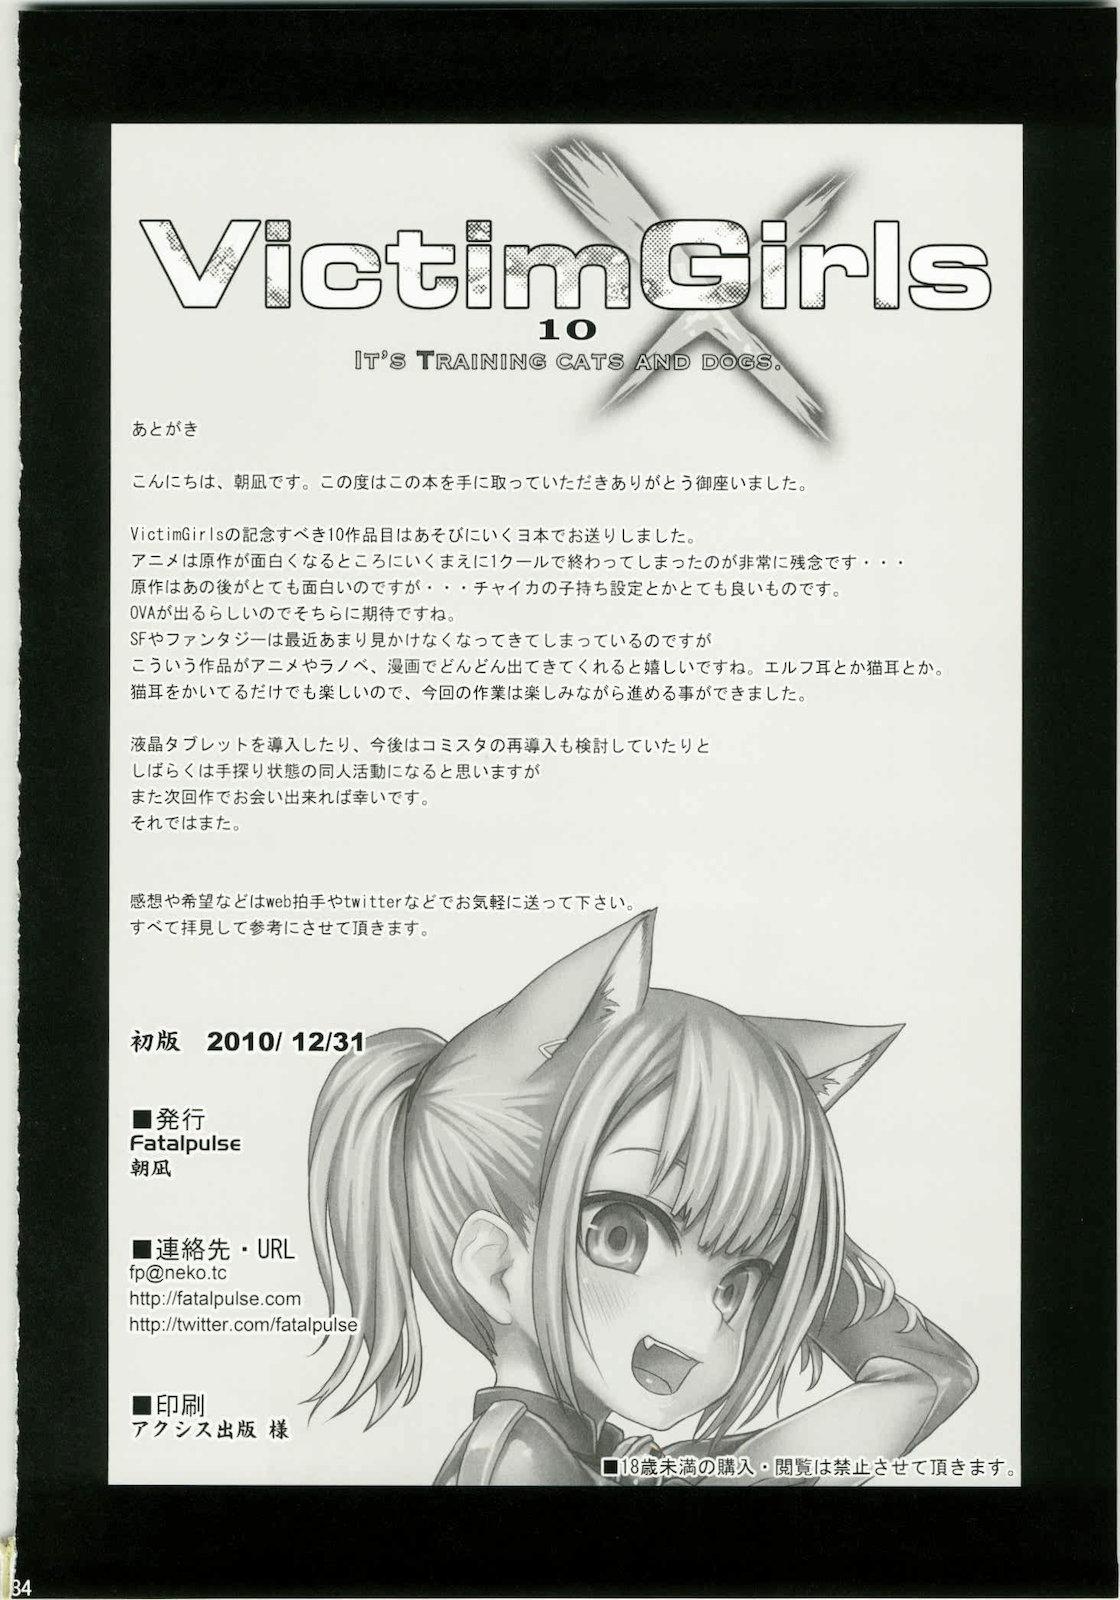 Victim Girls 10 - It's Training Cats and Dogs. 33